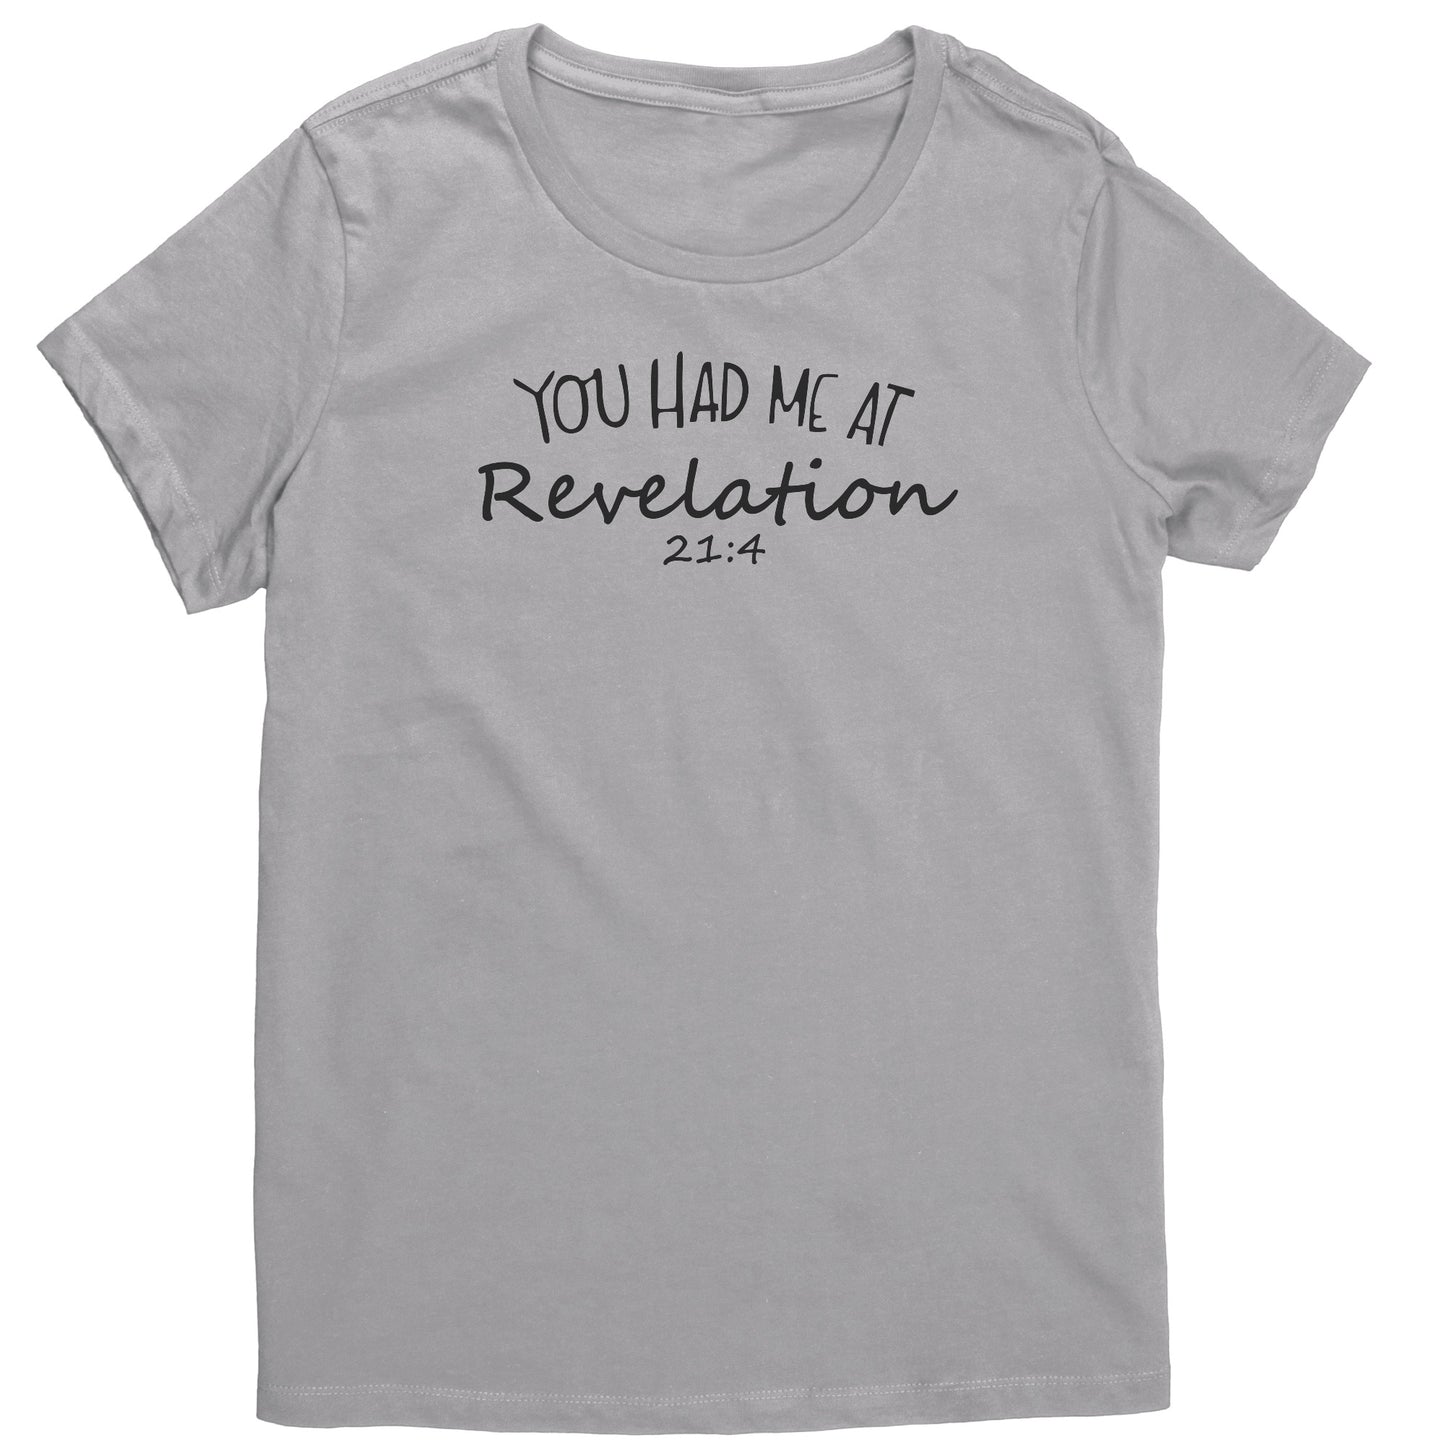 You Had Me At Revelation 21:4 Women's T-Shirt Part 1